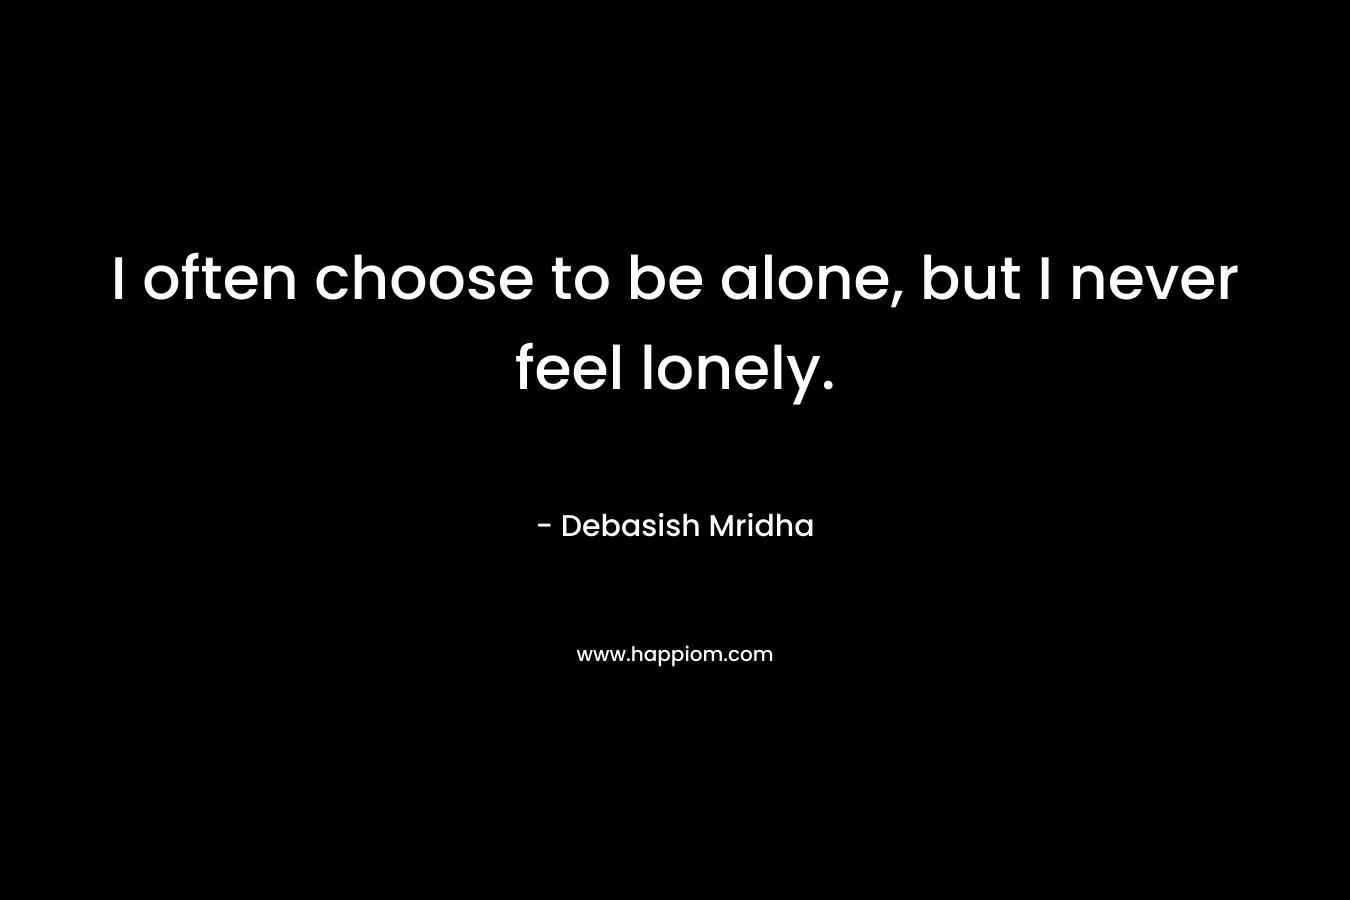 I often choose to be alone, but I never feel lonely.